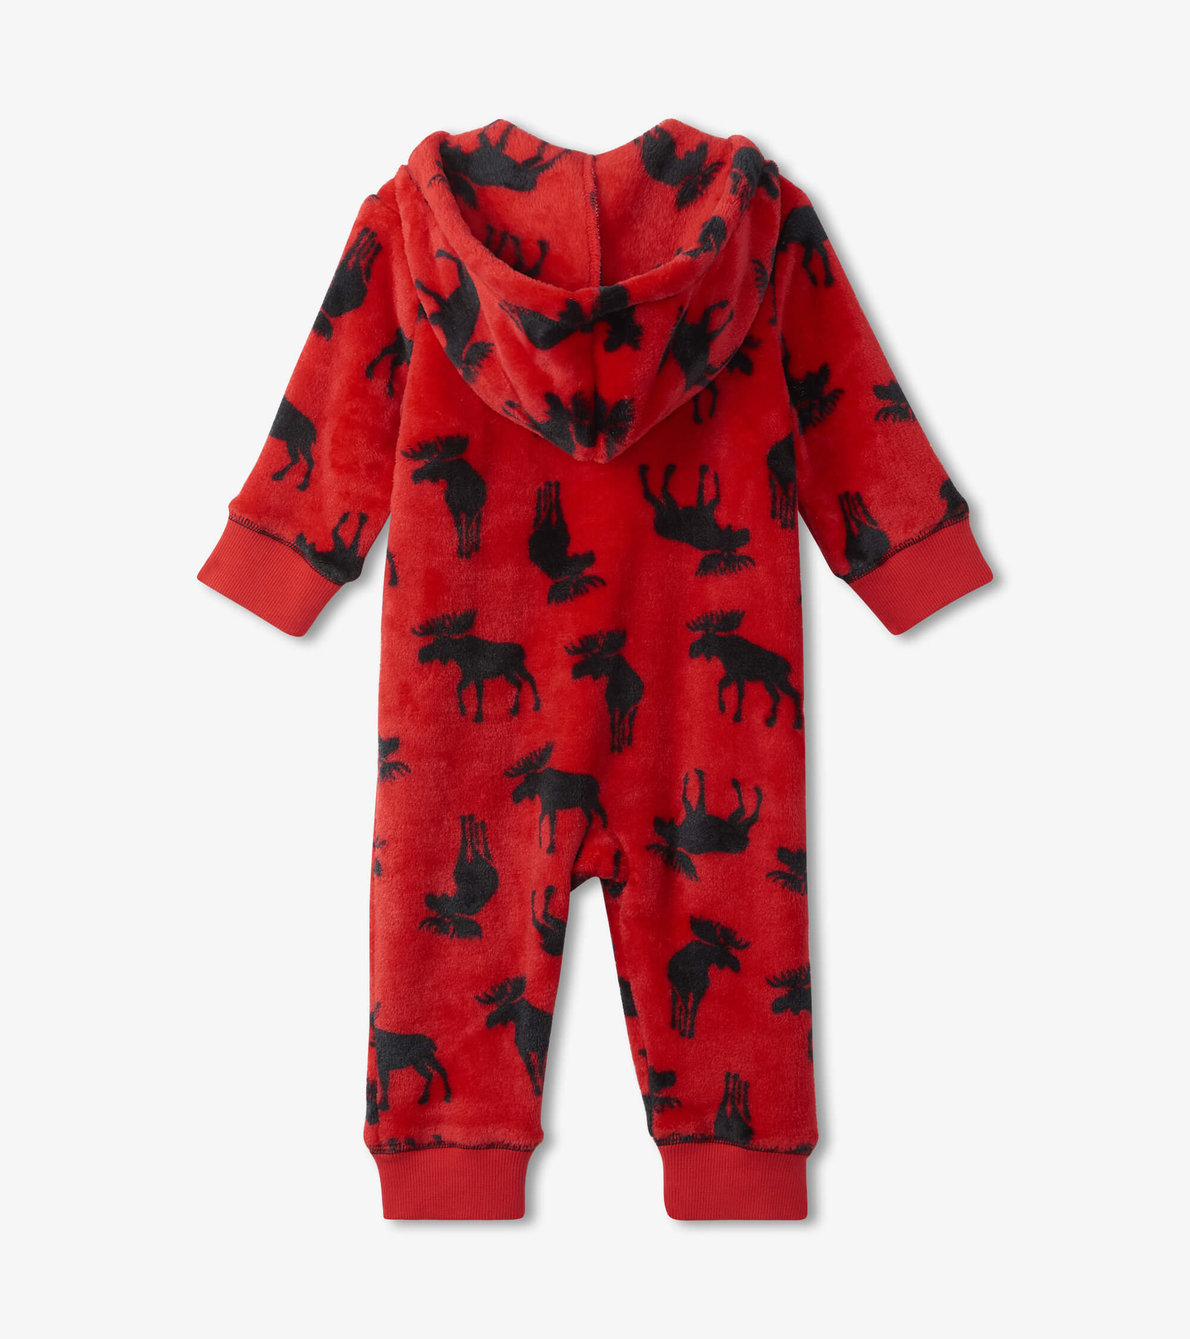 View larger image of Baby Moose on Red Hooded Fleece Jumpsuit